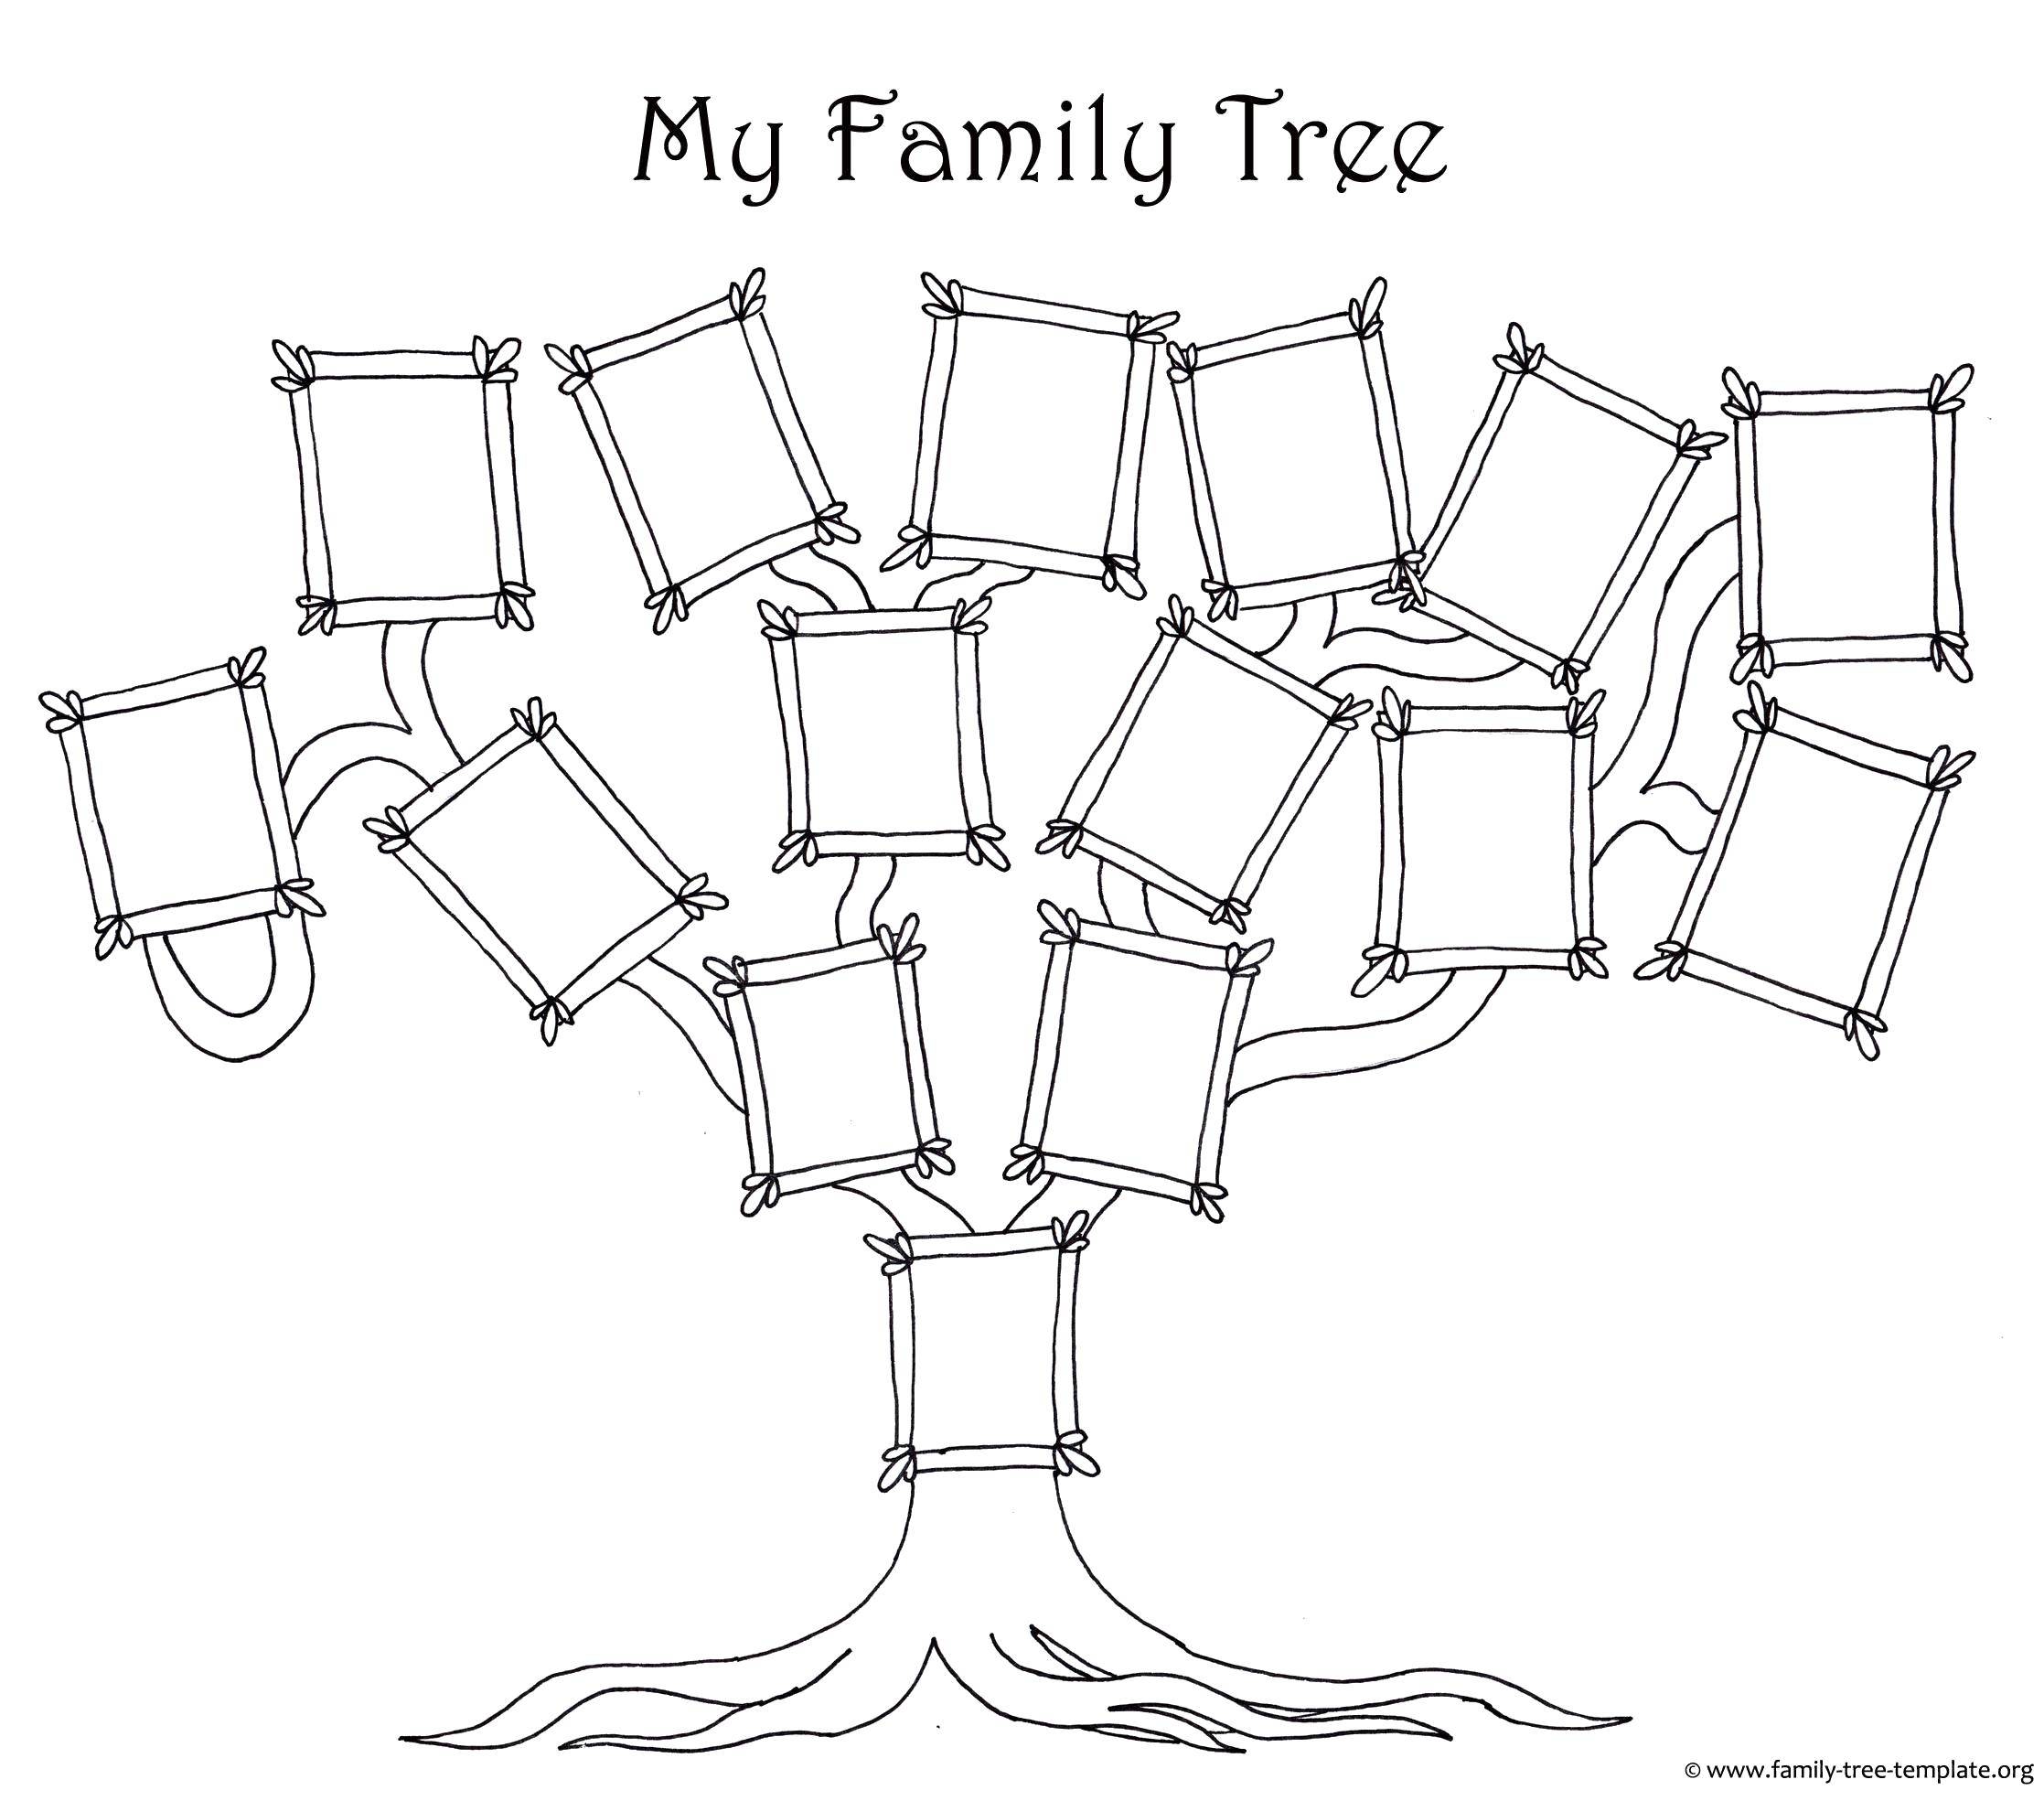 Coloring My family tree. Category Family members. Tags:  Family, parents, children, happiness.